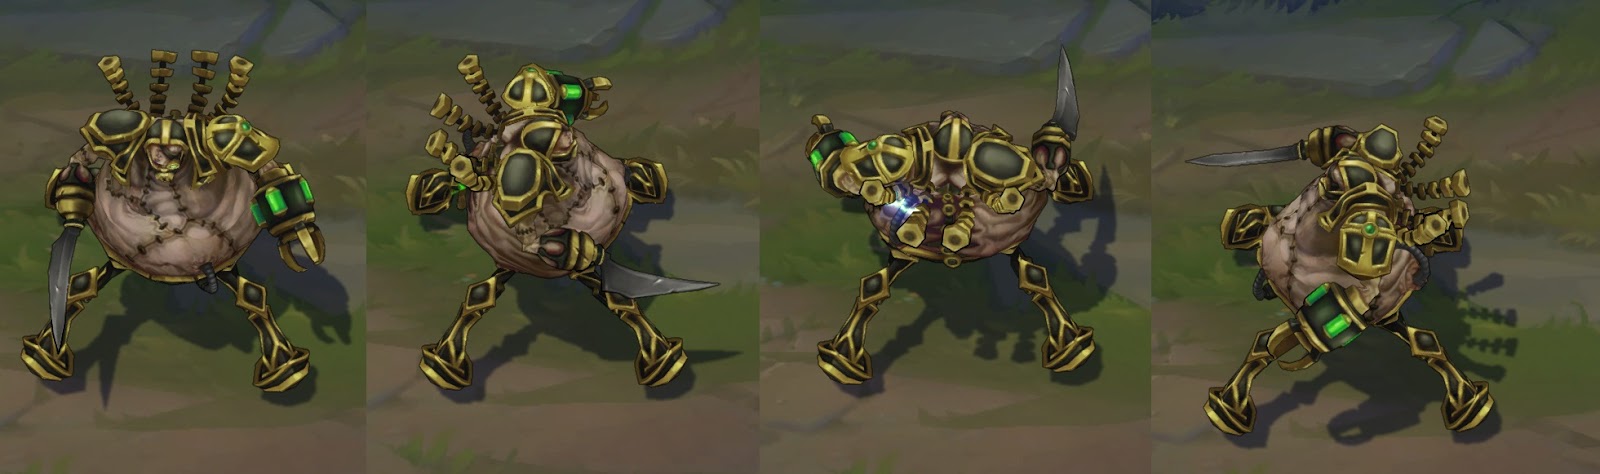 Now Here’s A Great Idea For A League Of Legends Skin